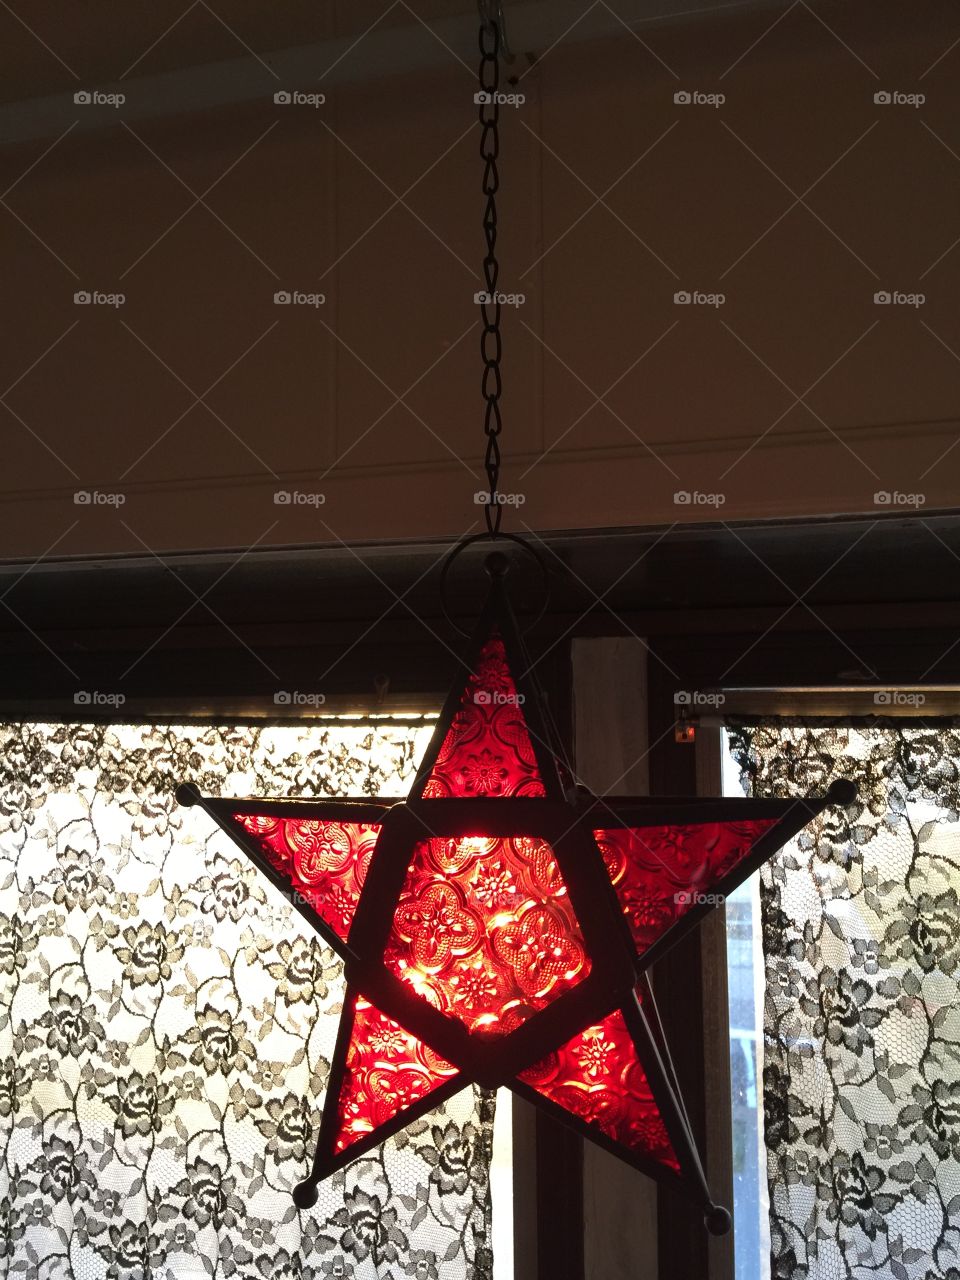 Red glass star hanging in the window with sunlight shining through